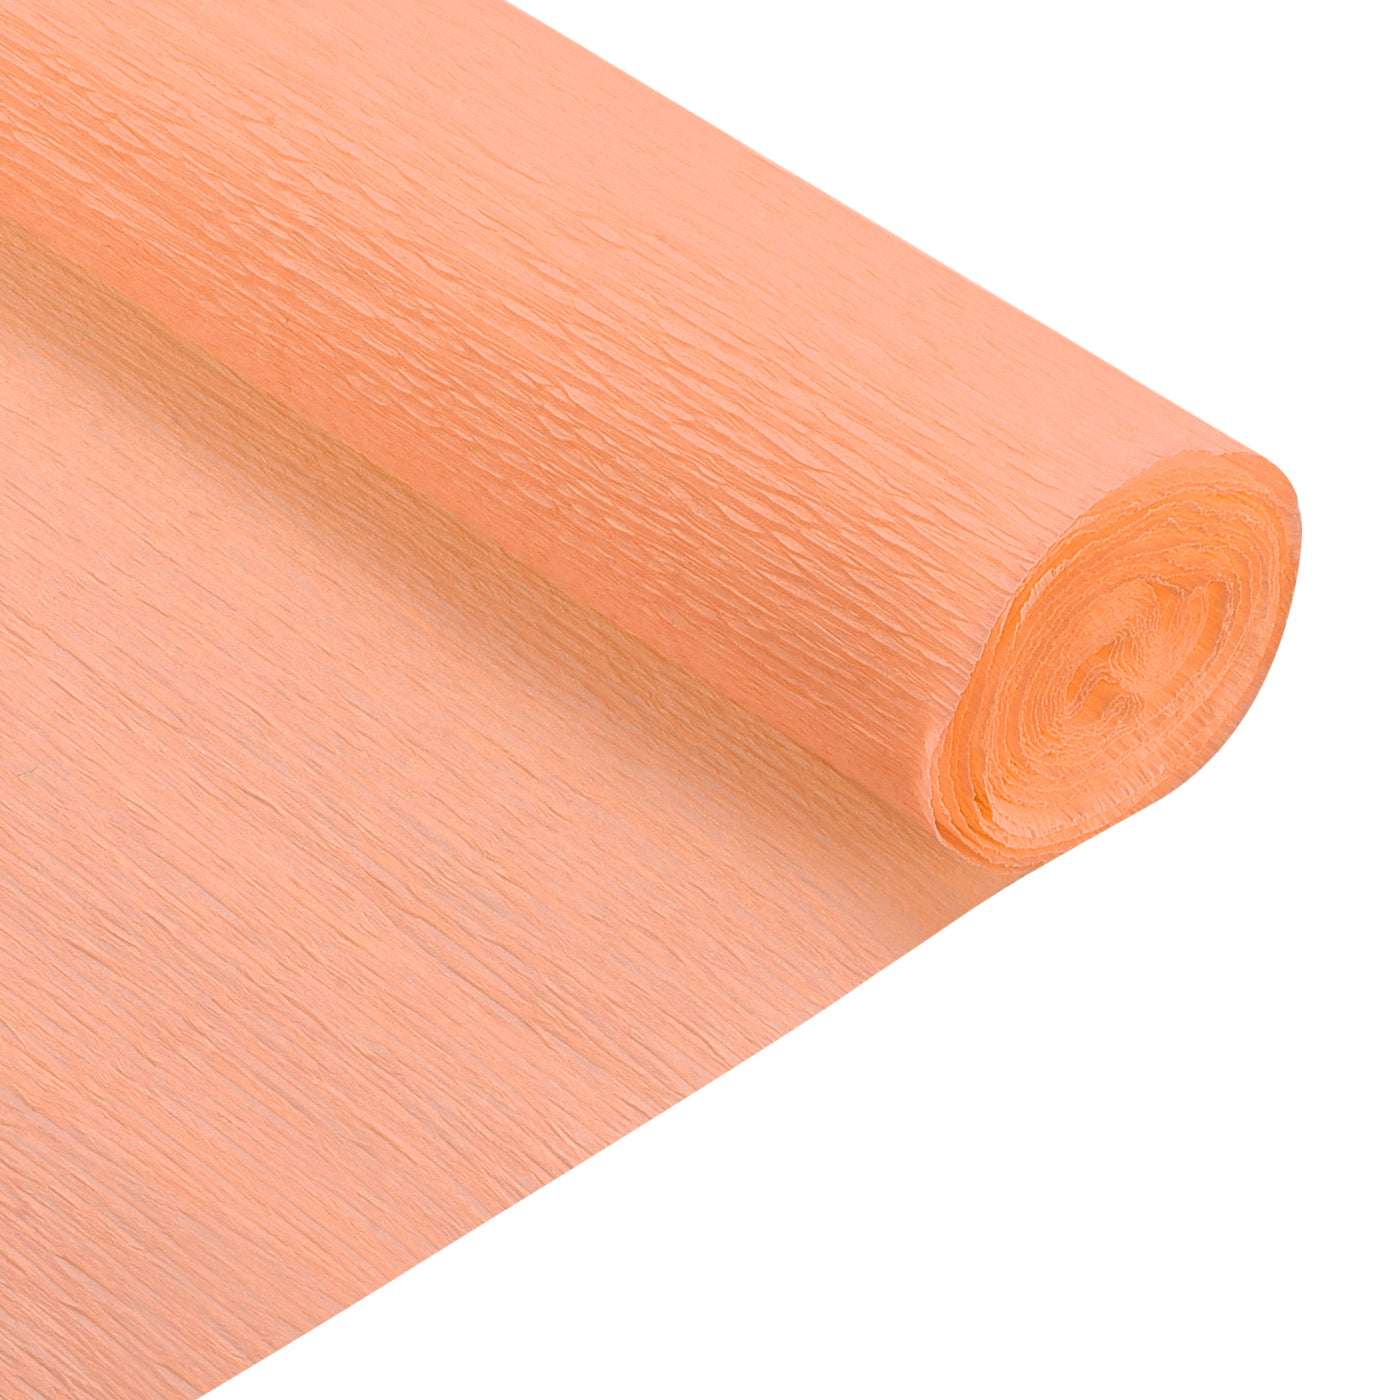 Harfington Crepe Paper Roll Crepe Paper Decor 7.5ft Long 20 Inch Wide, Deep Champagne